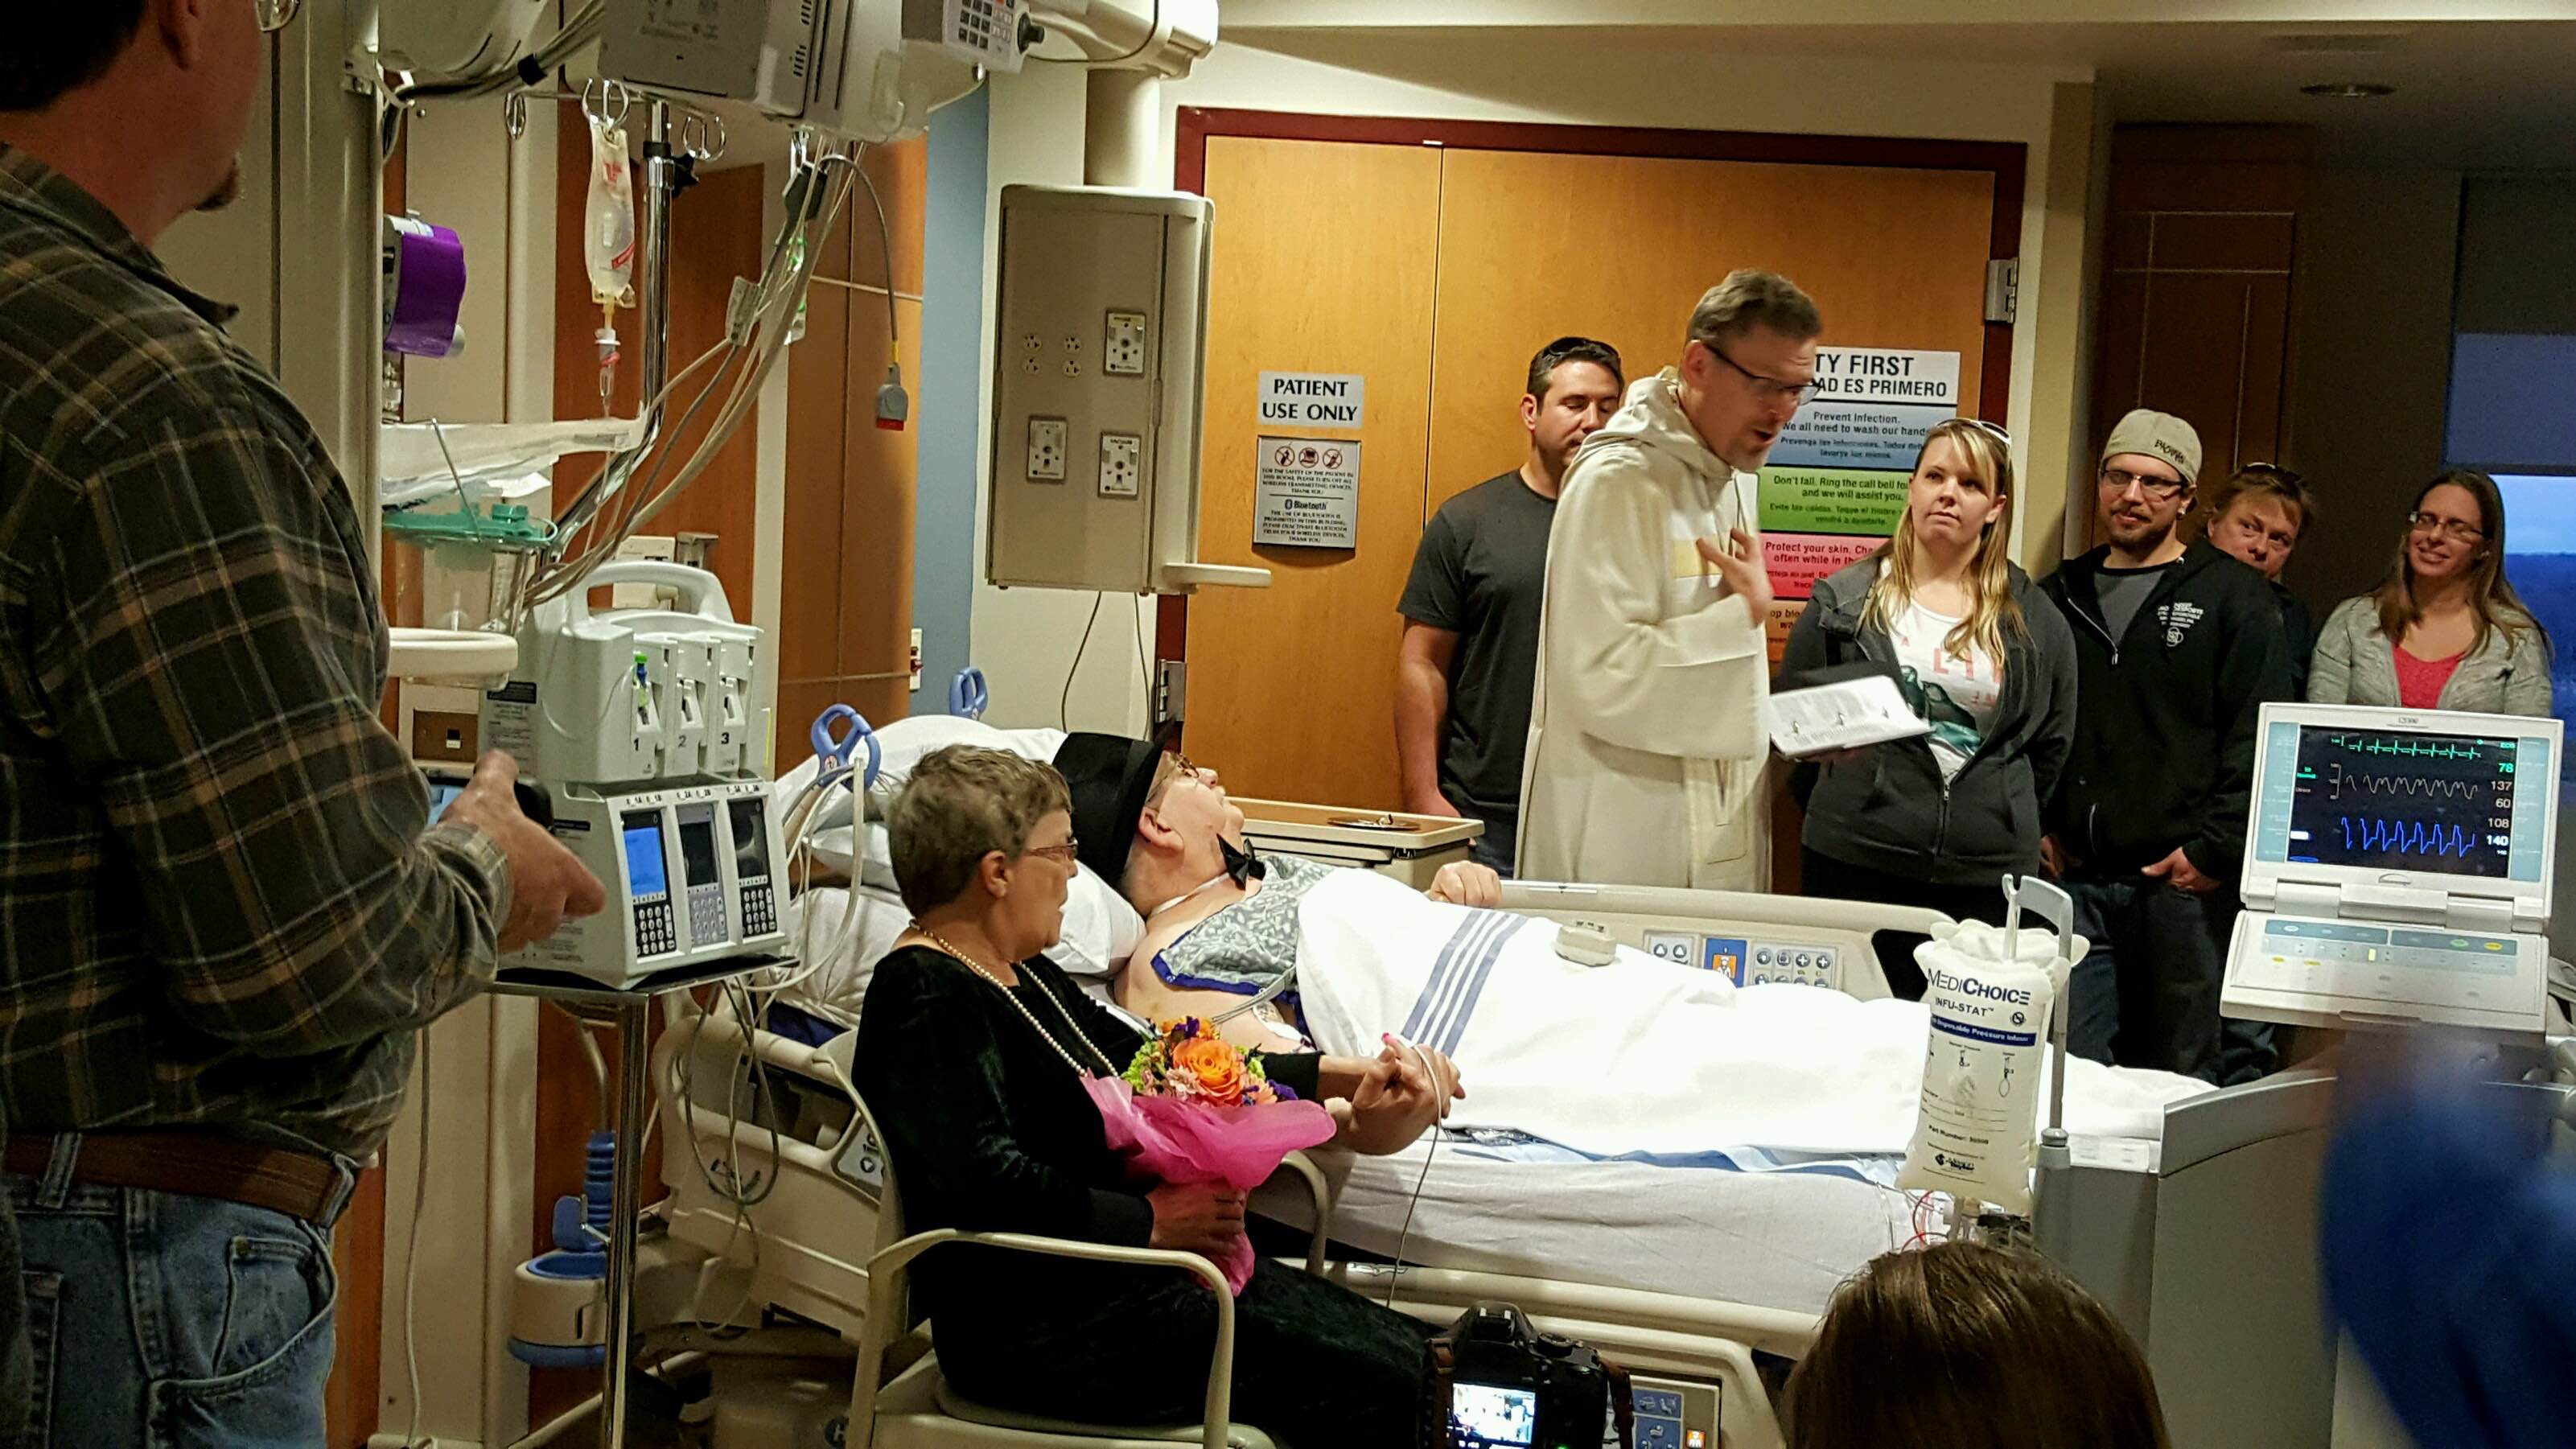 Pre-surgery hospital wedding requires all hearts on deck